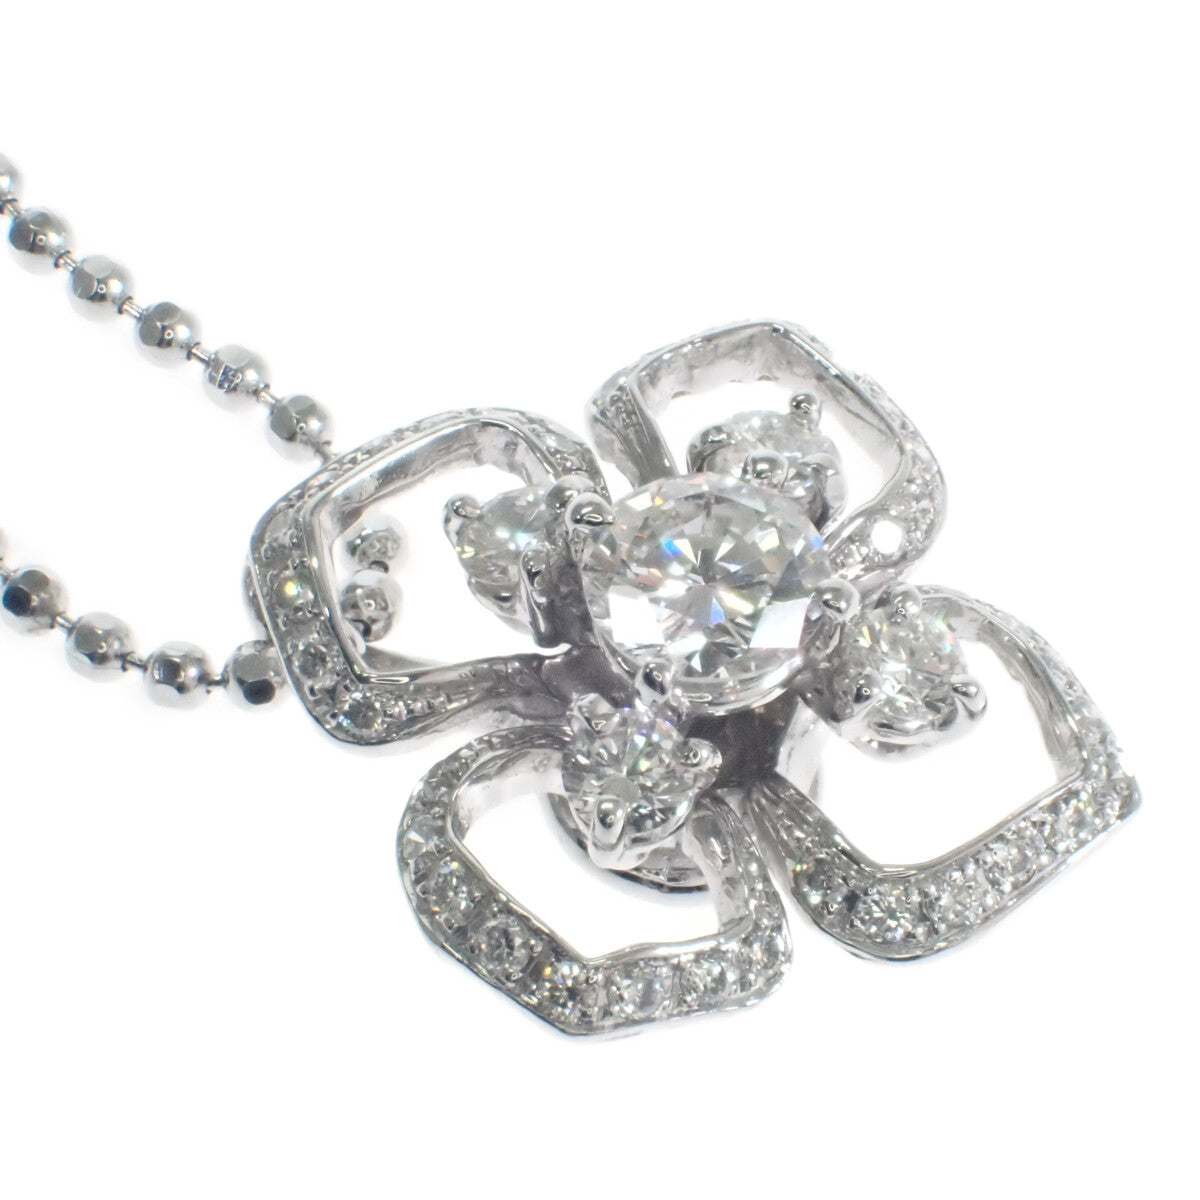 [LuxUness]  K18 White Gold Flower Design Necklace with 0.23ct Diamond for Women in Excellent condition